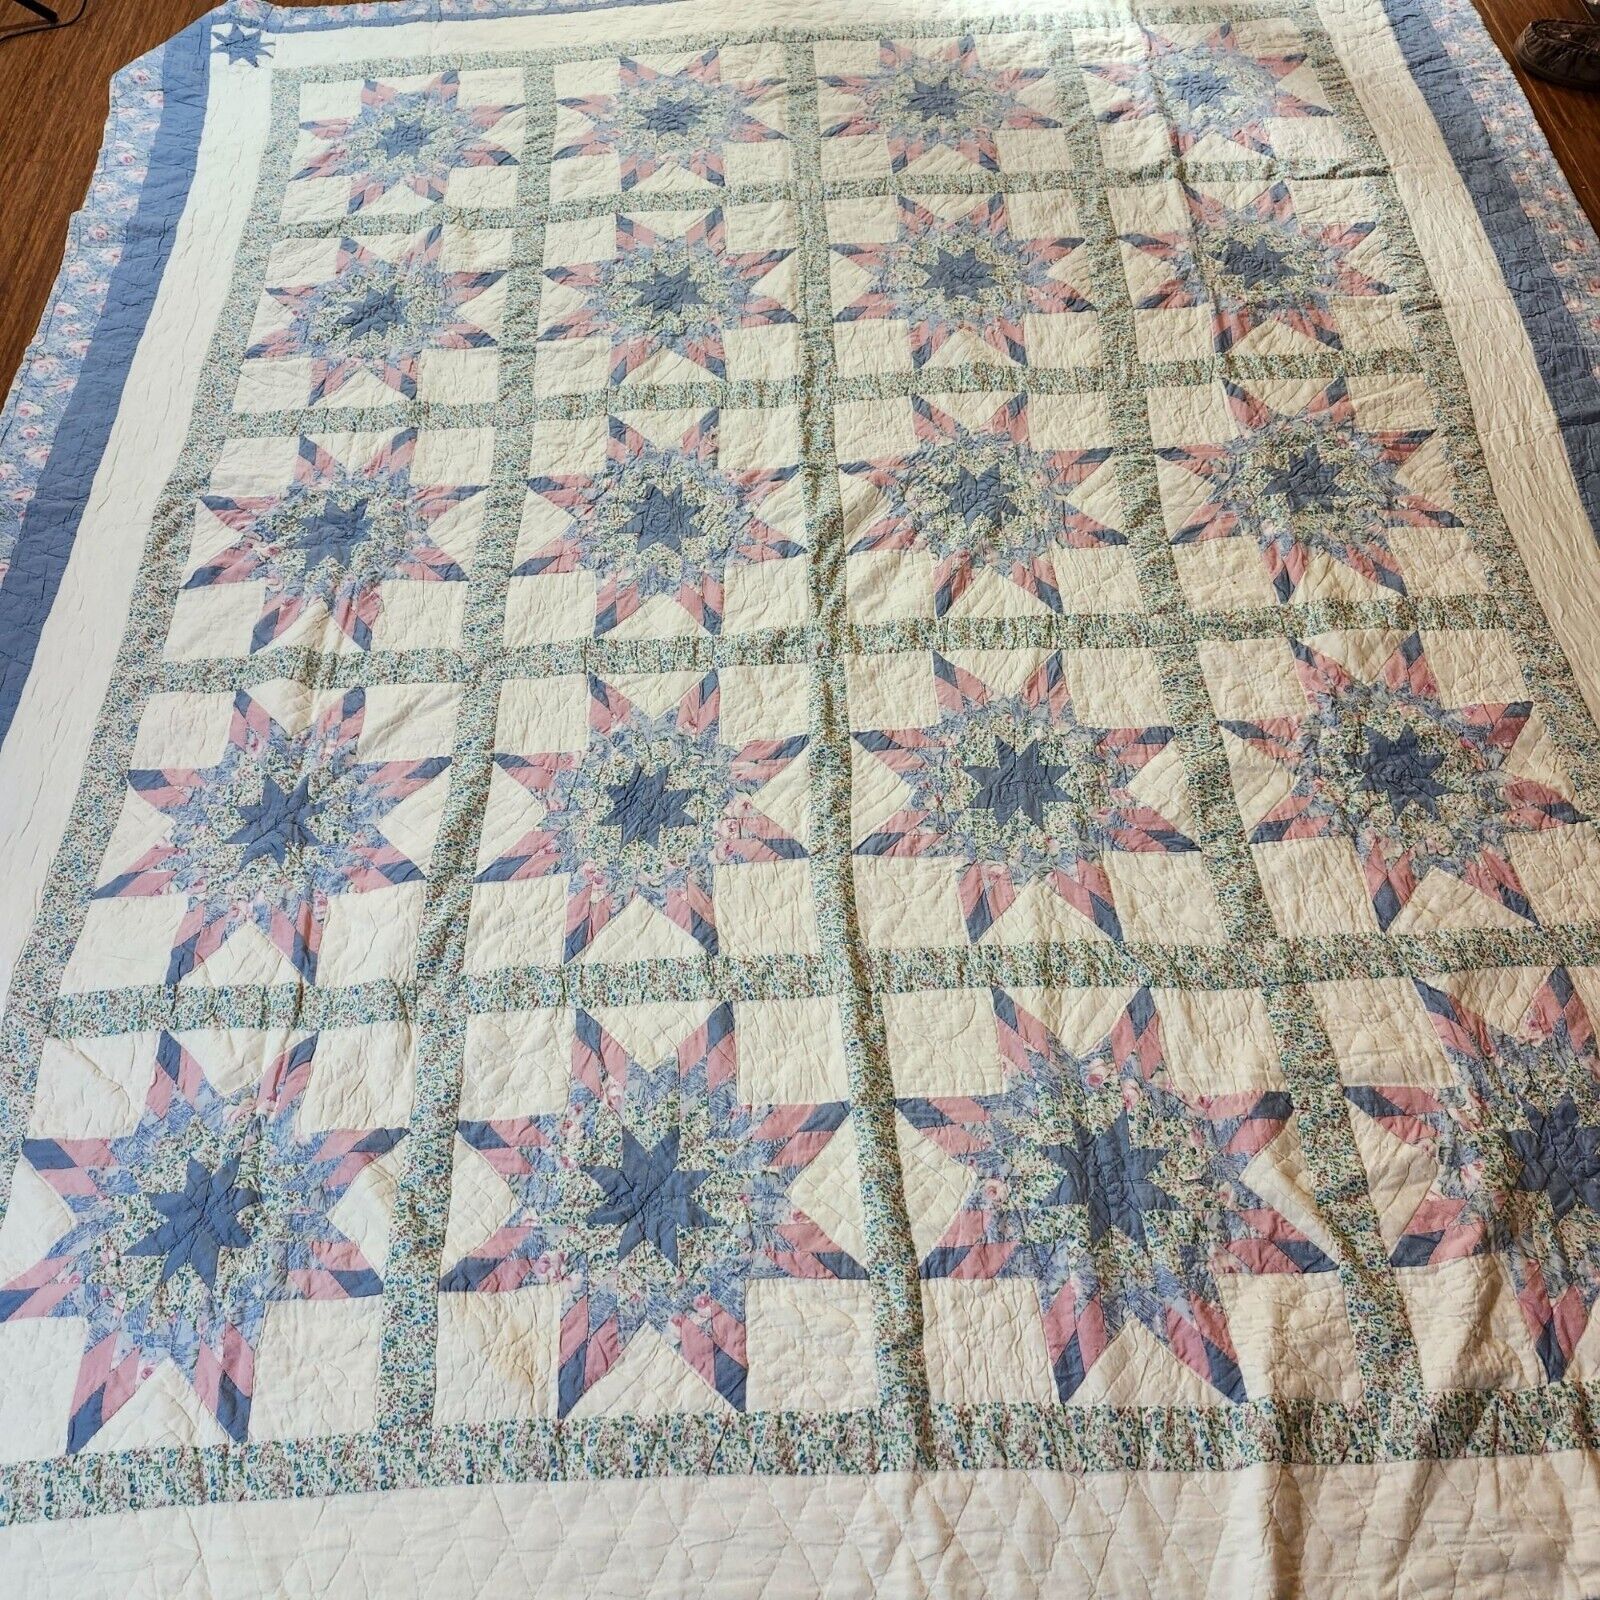 Handmade Quilt 8 point Star Pattern Vintage 95x80 Floral Blue and Pink Item #QST